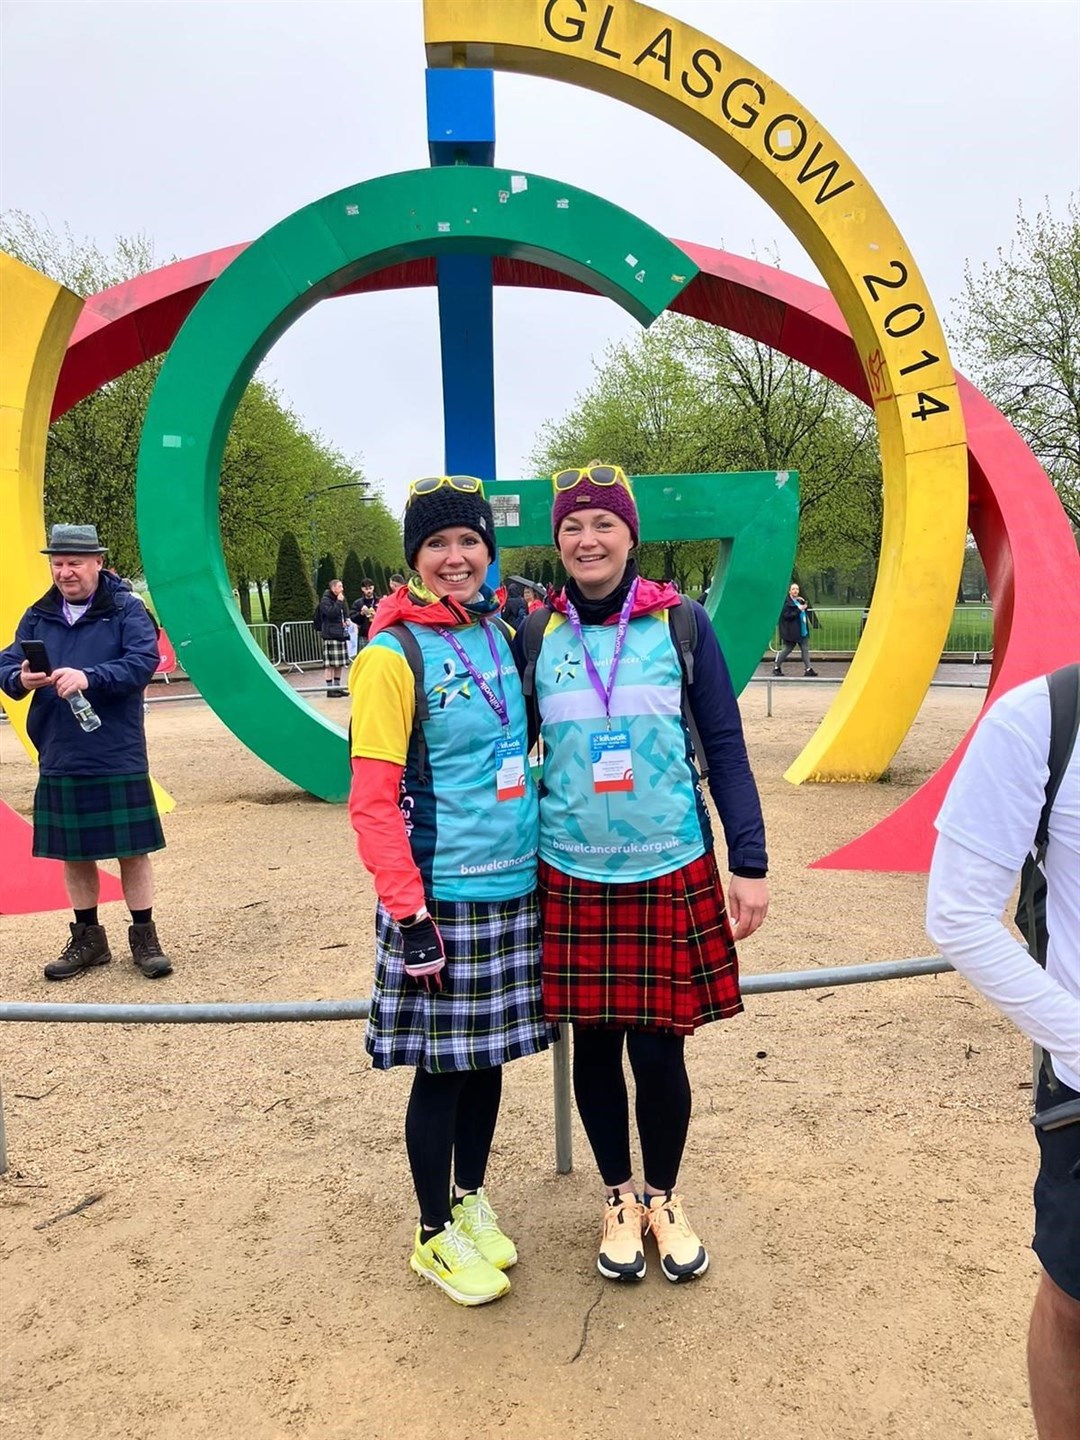 Mandy (right) and her sister Debbie after completing the Glasgow Kiltwalk.